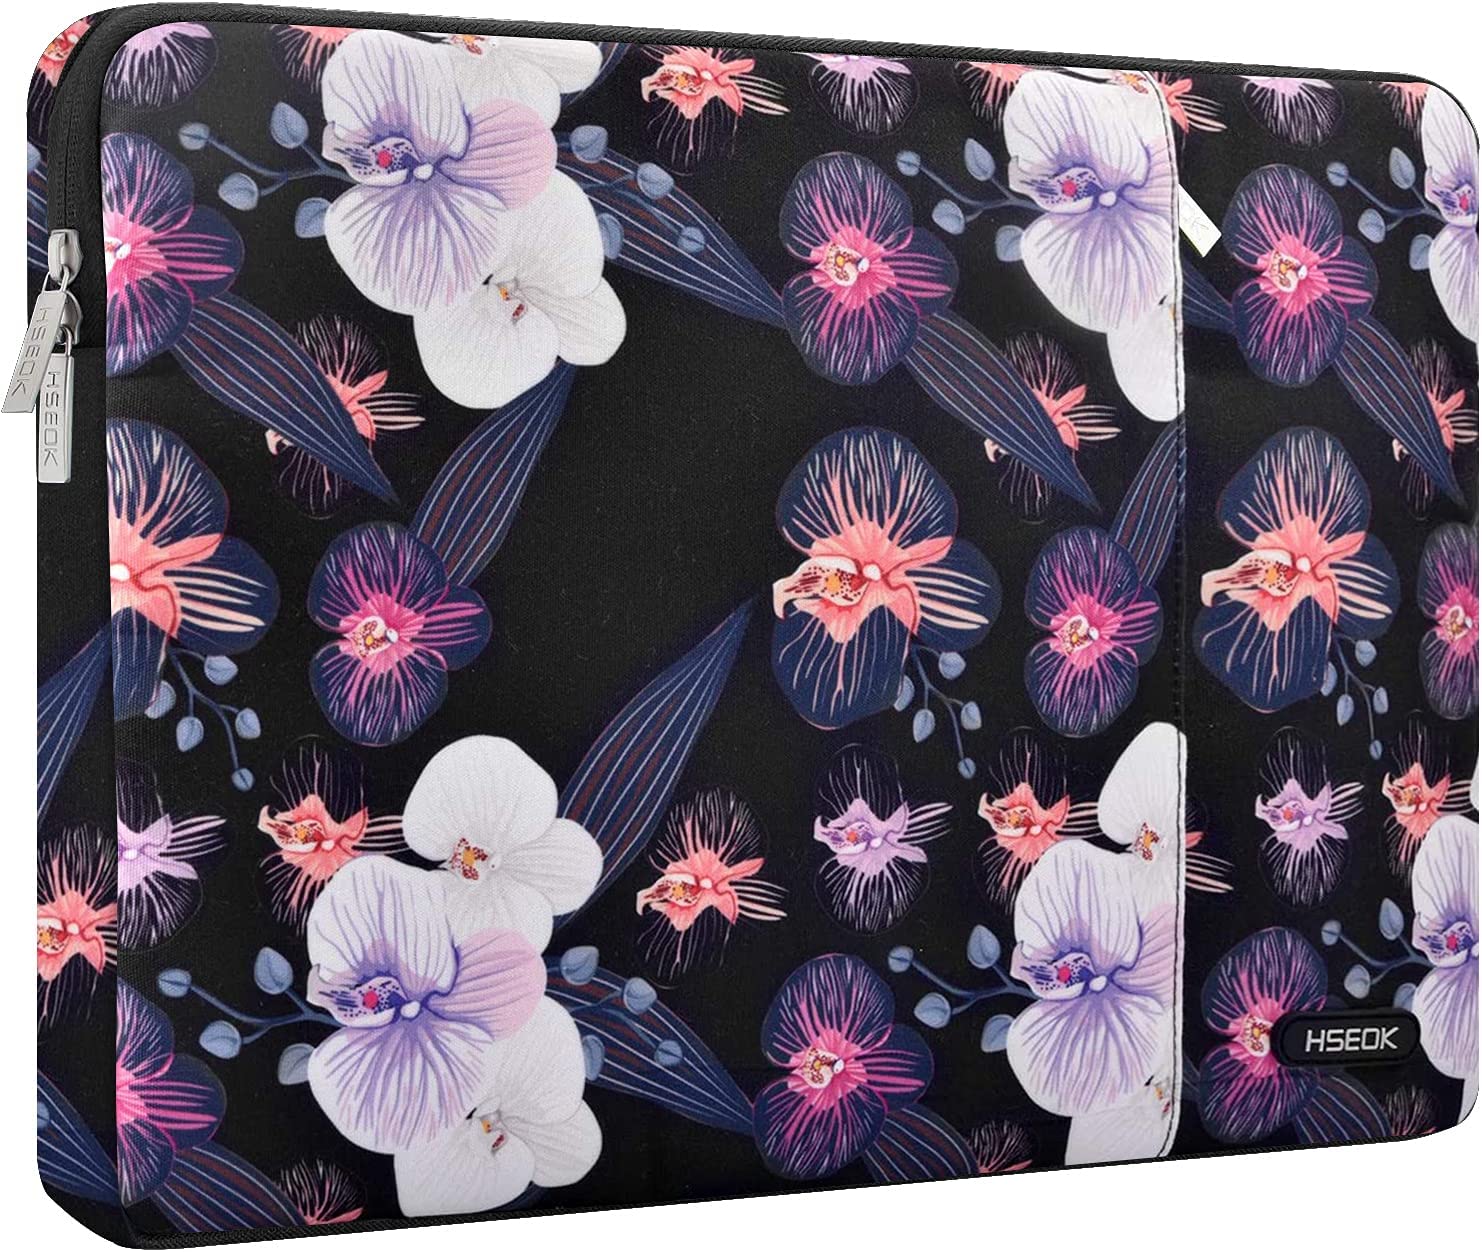 Laptop Case 13.3 14 15 15.6 16 Inch Sleeve Water Resistant Cover for MacBook Pro Air and Most Popular 13-16 inch Notebooks